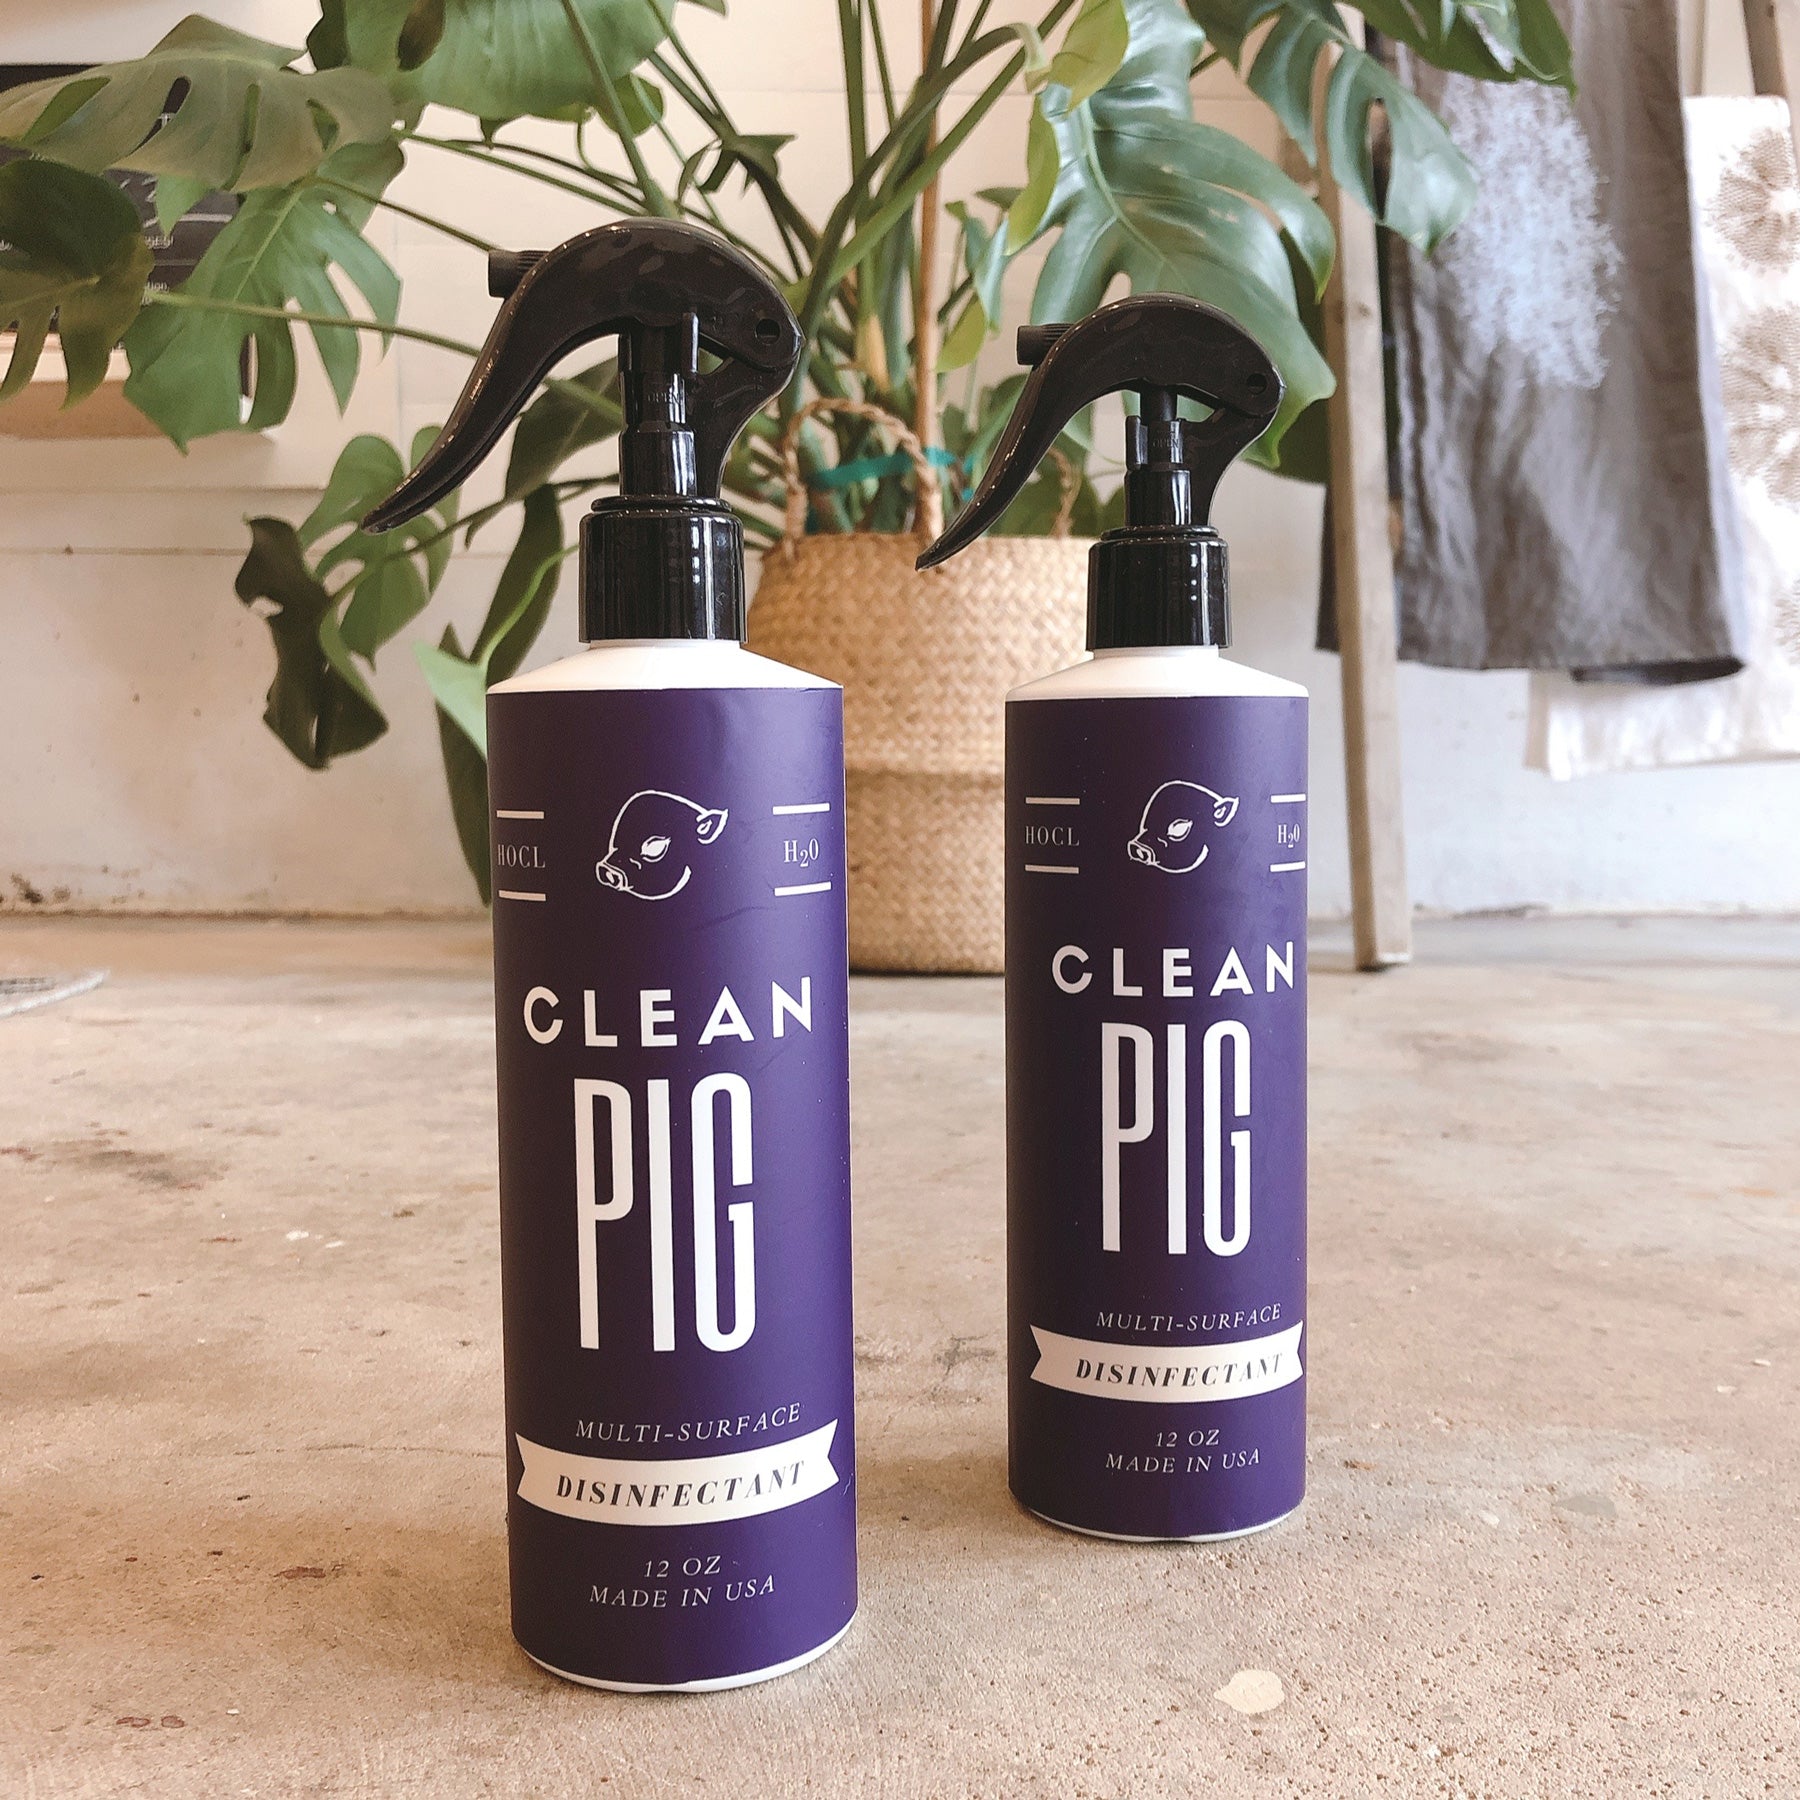 Clean Pig HOCl Disinfectant